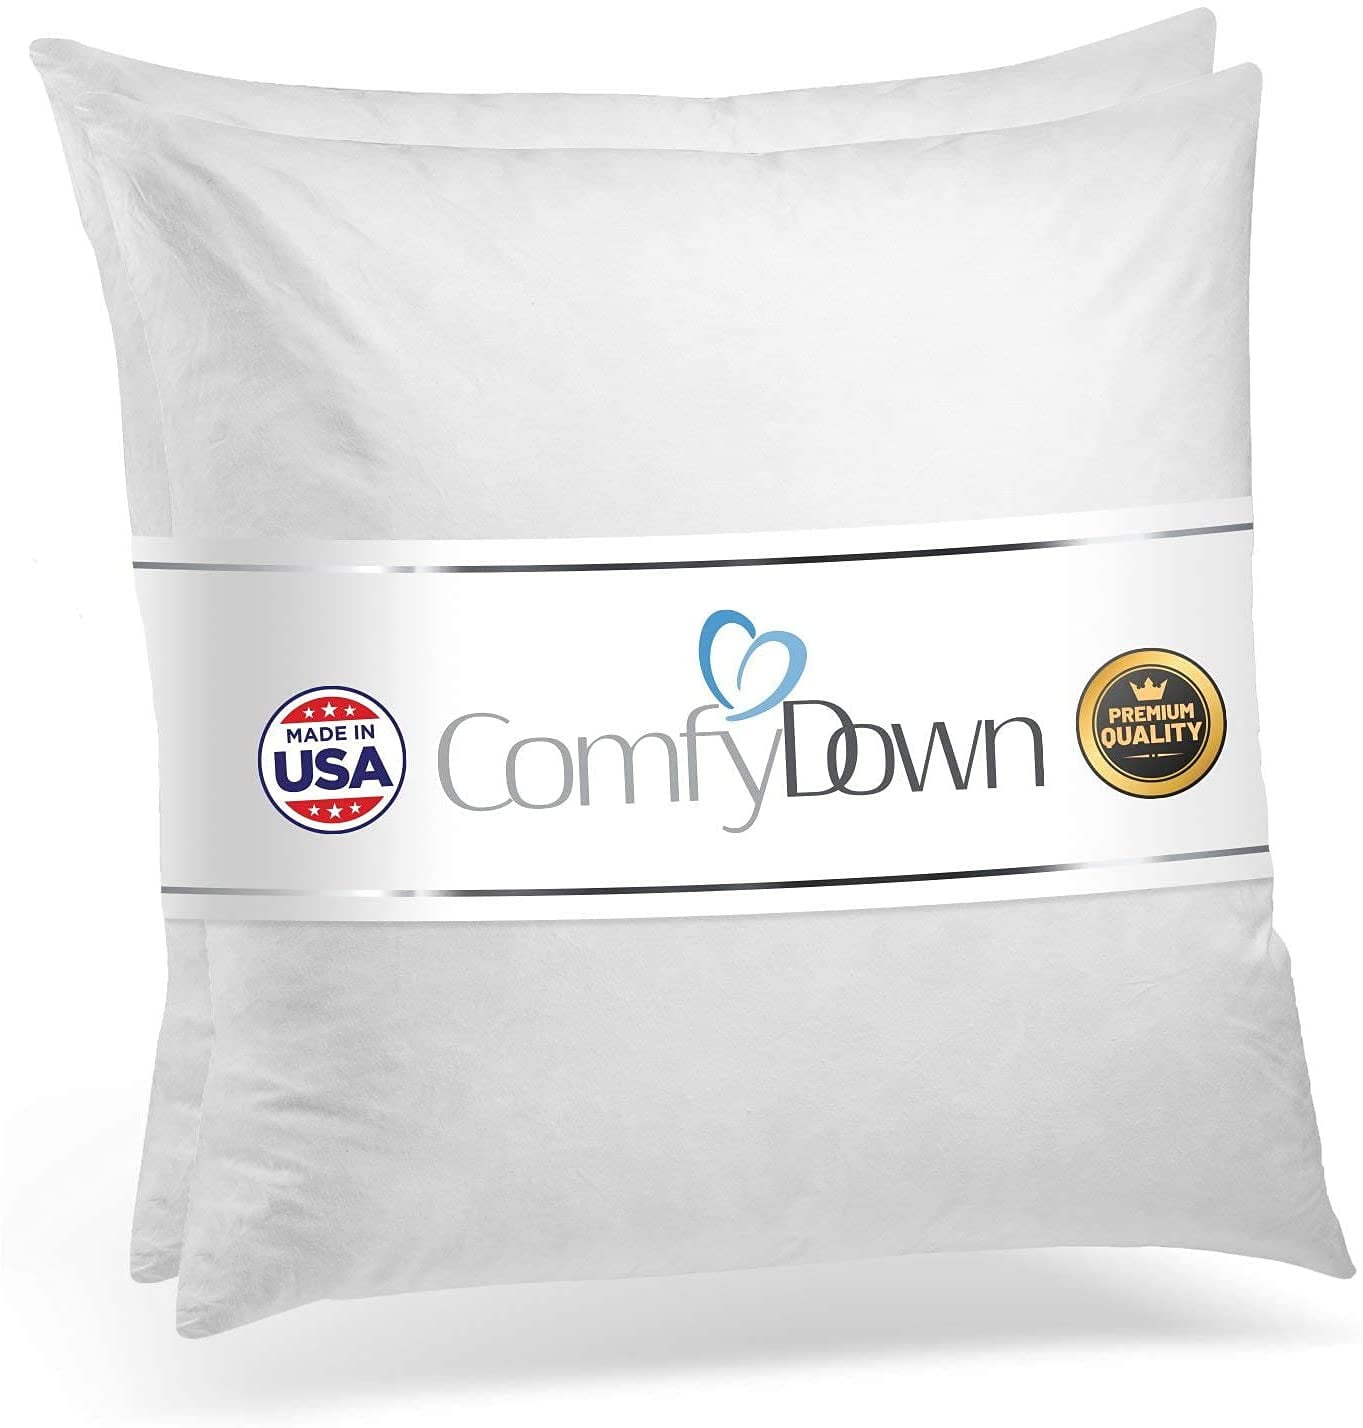 Unikome Euro Pillow Inserts Squared Pack of 2, 18 x18 Decorate